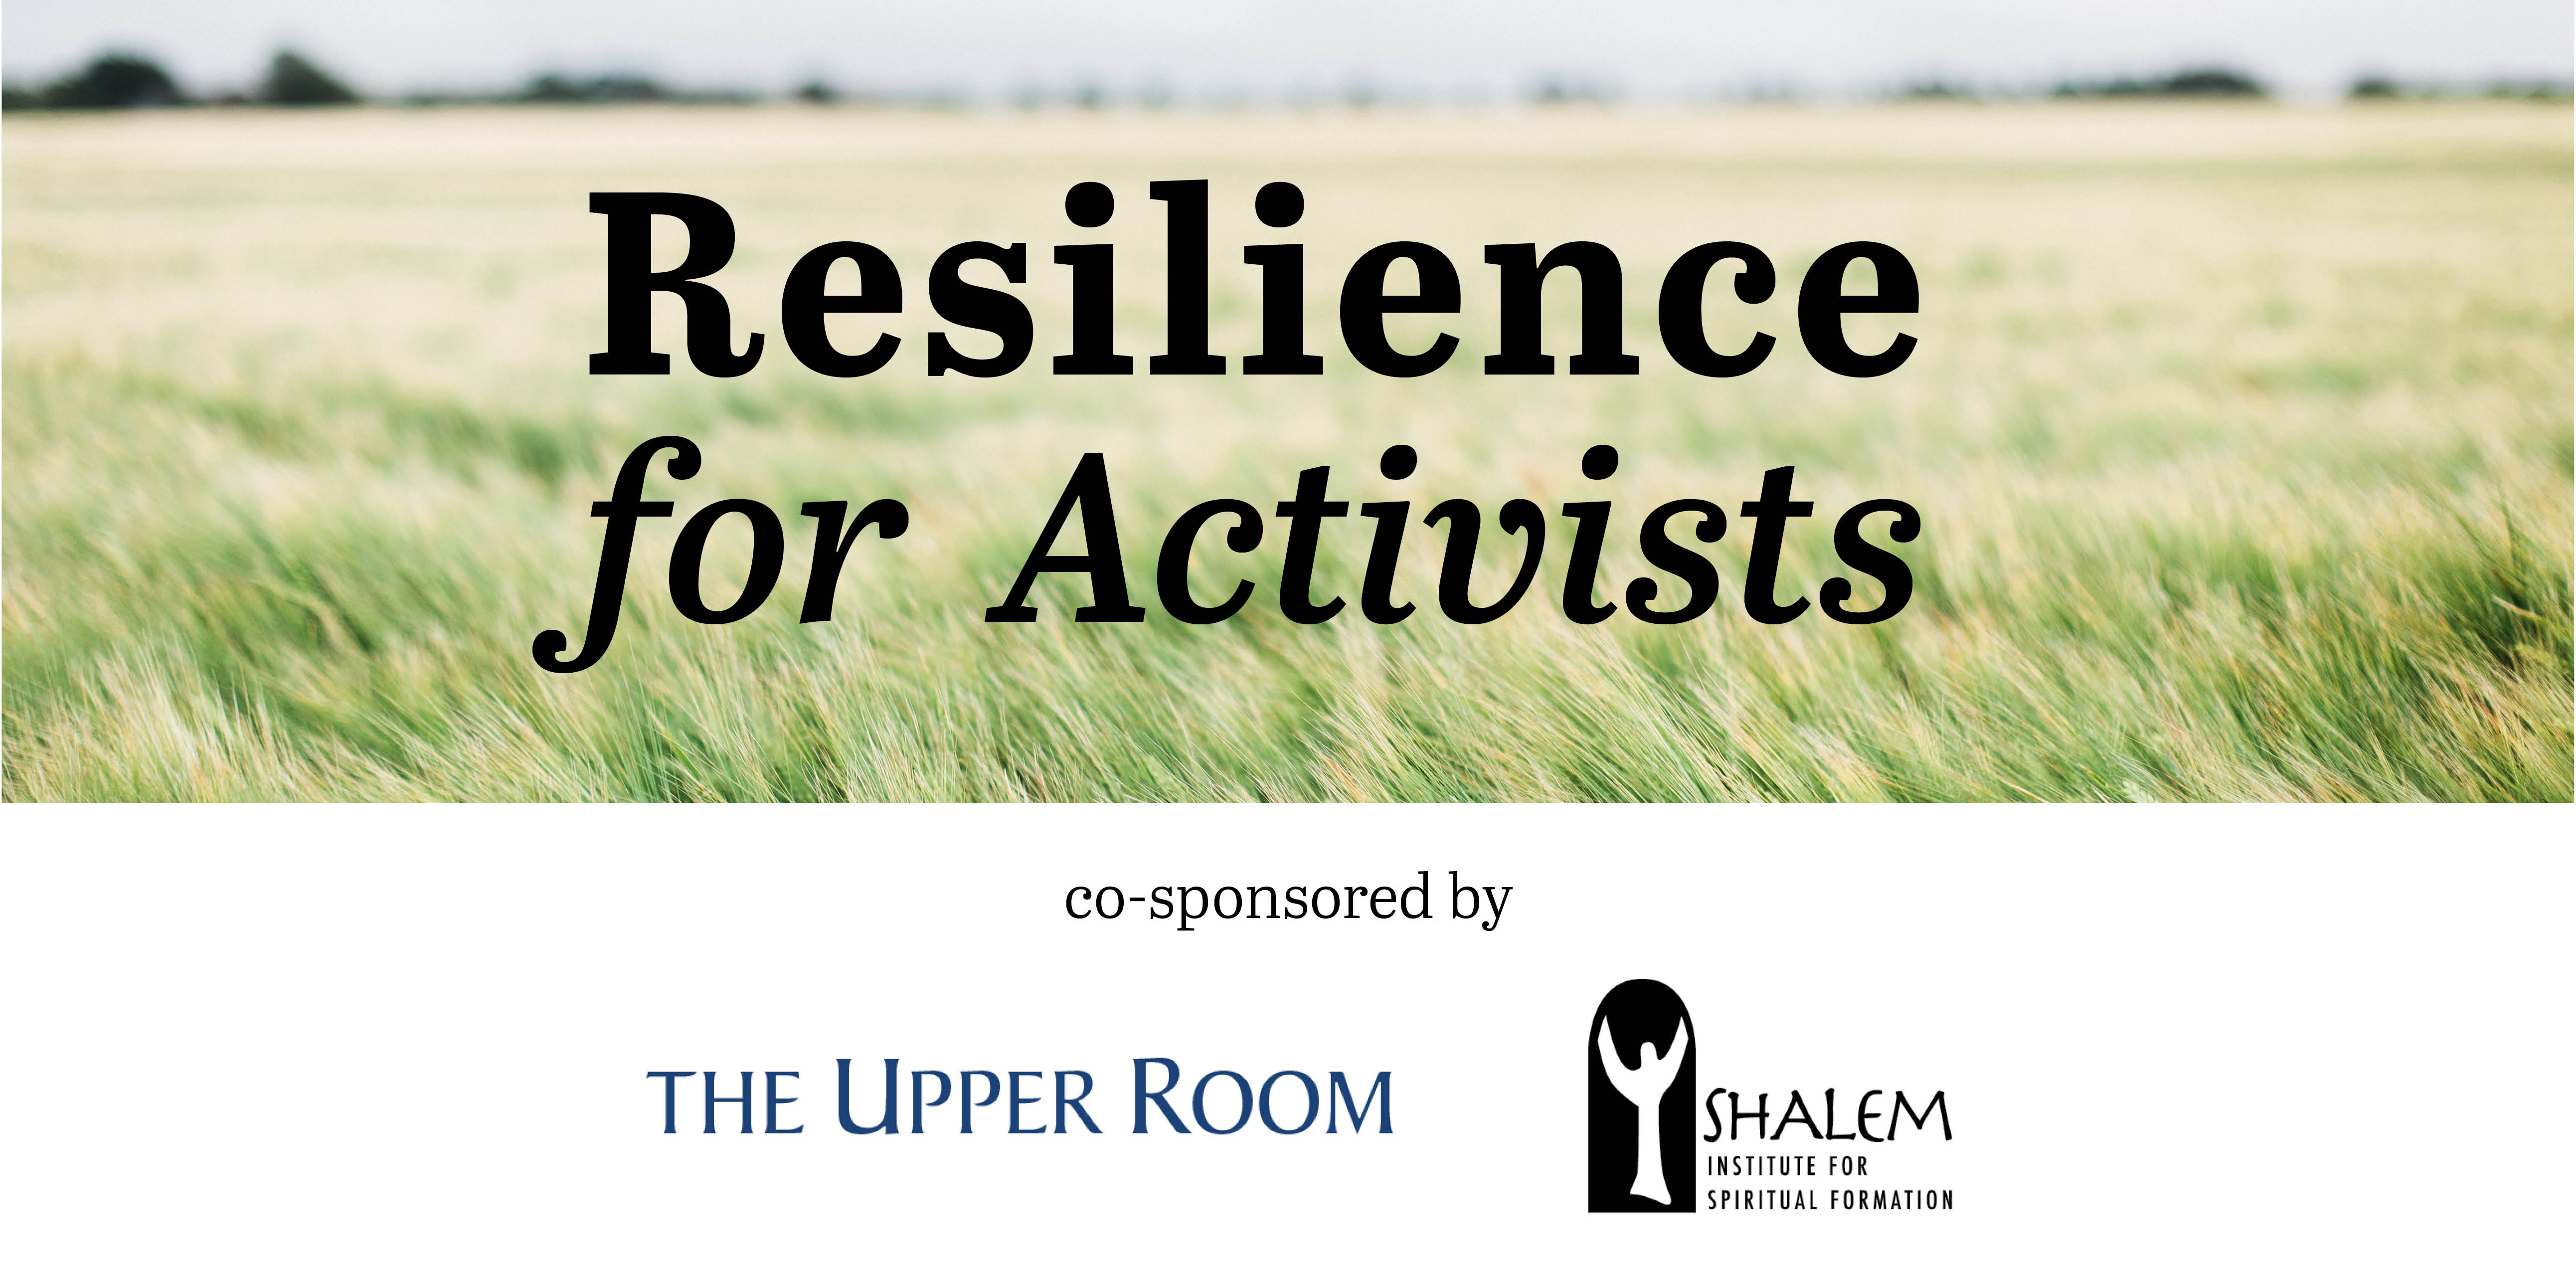 Resilience for Activists